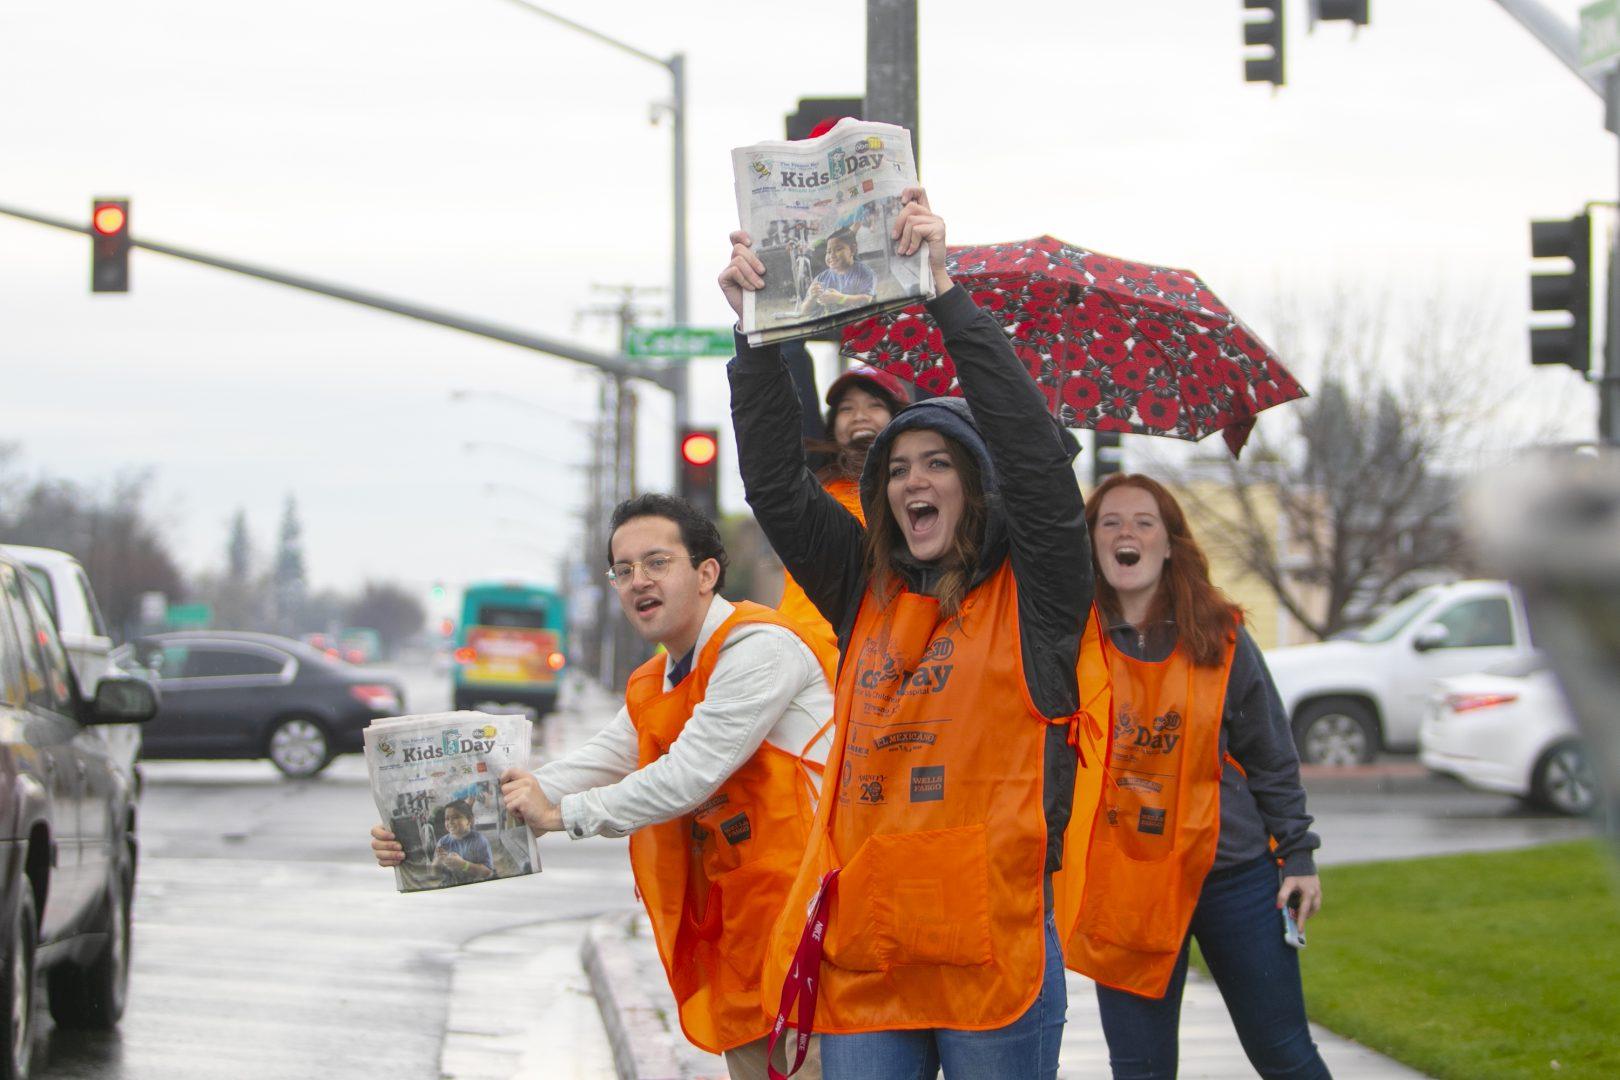 Fresno State student Isabella Medina hands out Kids Day papers with her sociology club at the corner of Barton and Shaw Avenues on Tuesday, March 5, 2019. (Larry Valenzuela/ The Collegian)